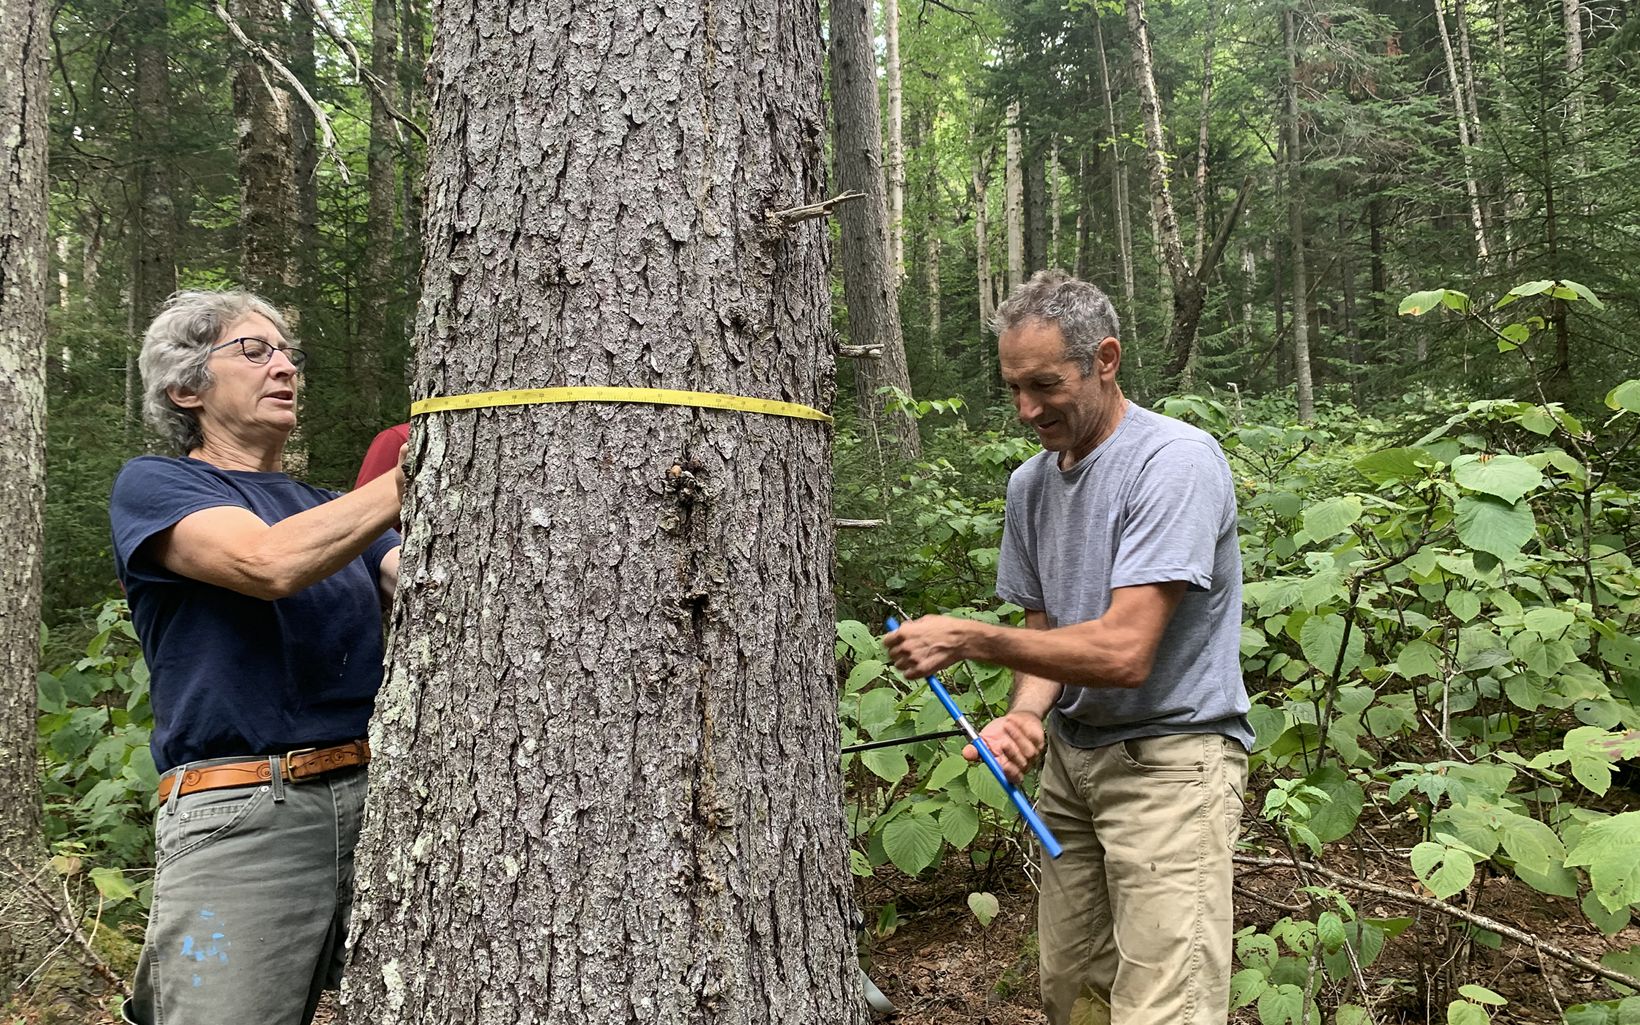 Measurements Scientists record the circumference of a tree and take a core sample to find its age. © Kira Bennett Hamilton/TNC